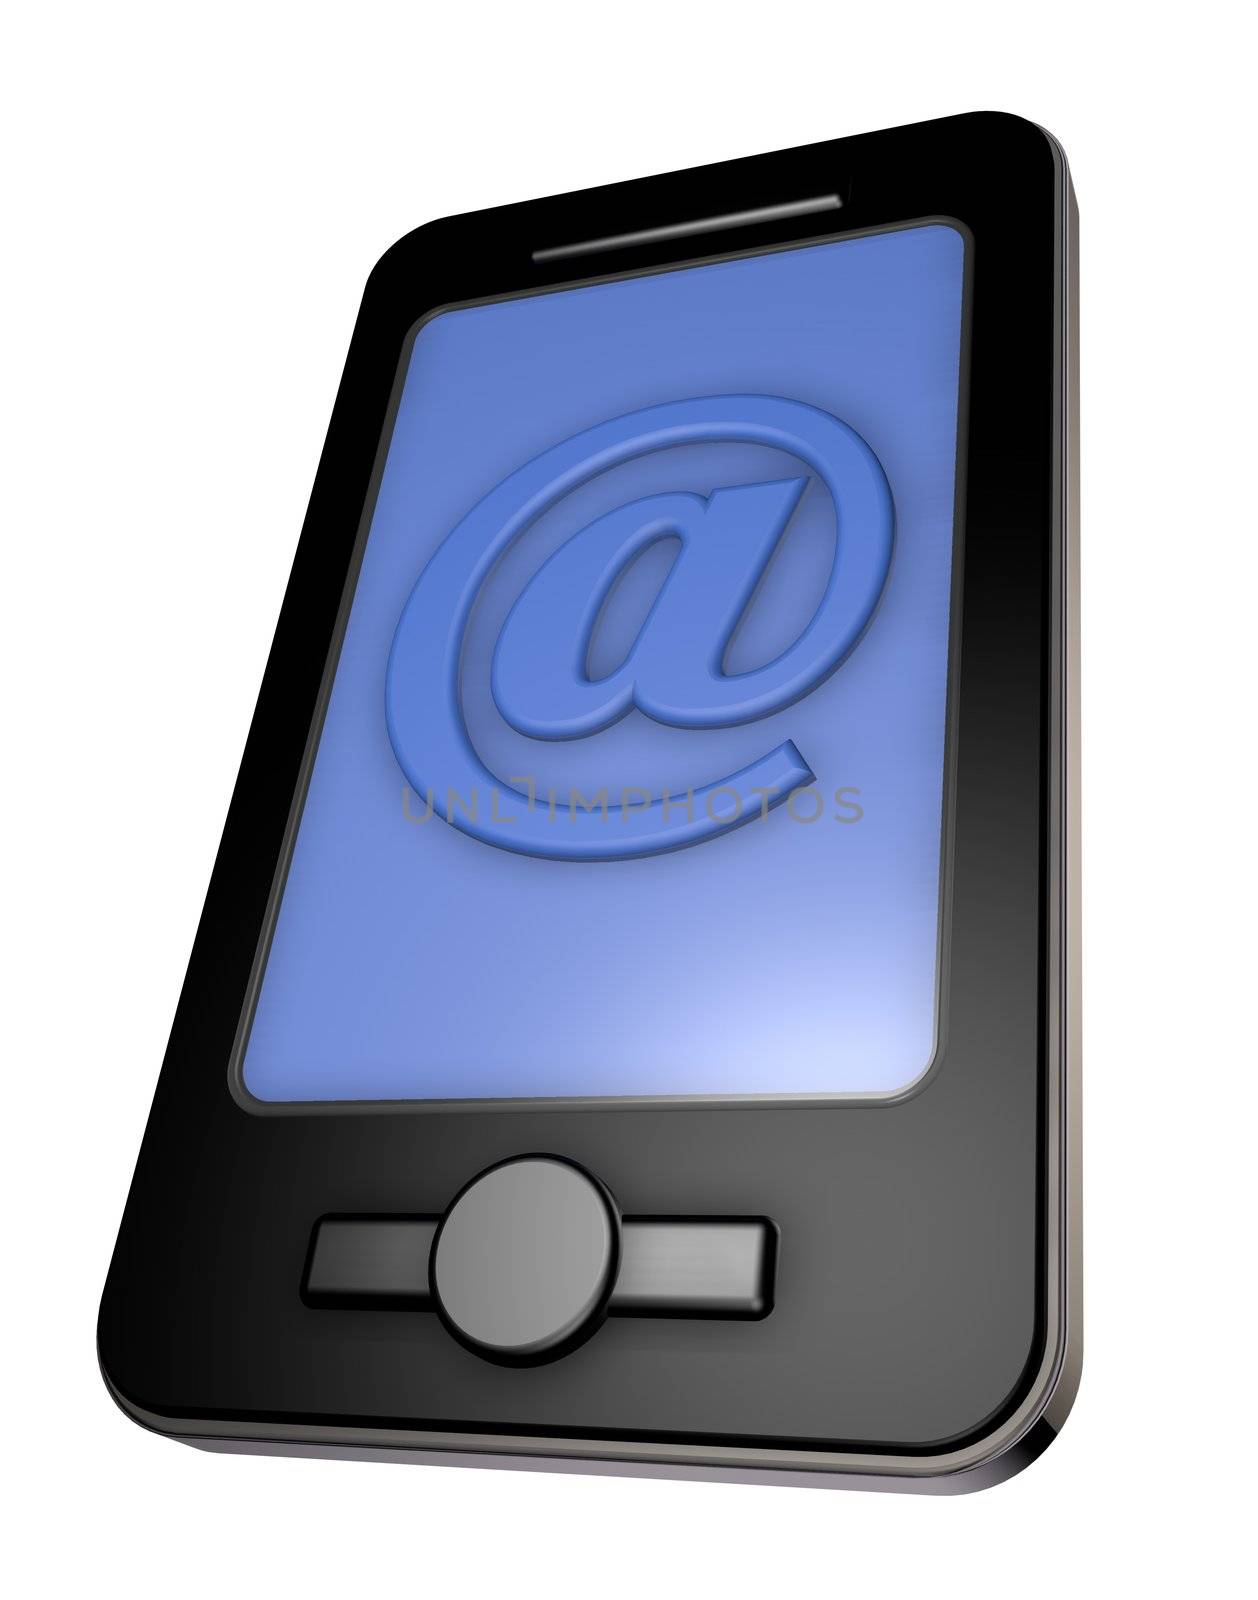 smartphone and email symbol on white background - 3d illustration